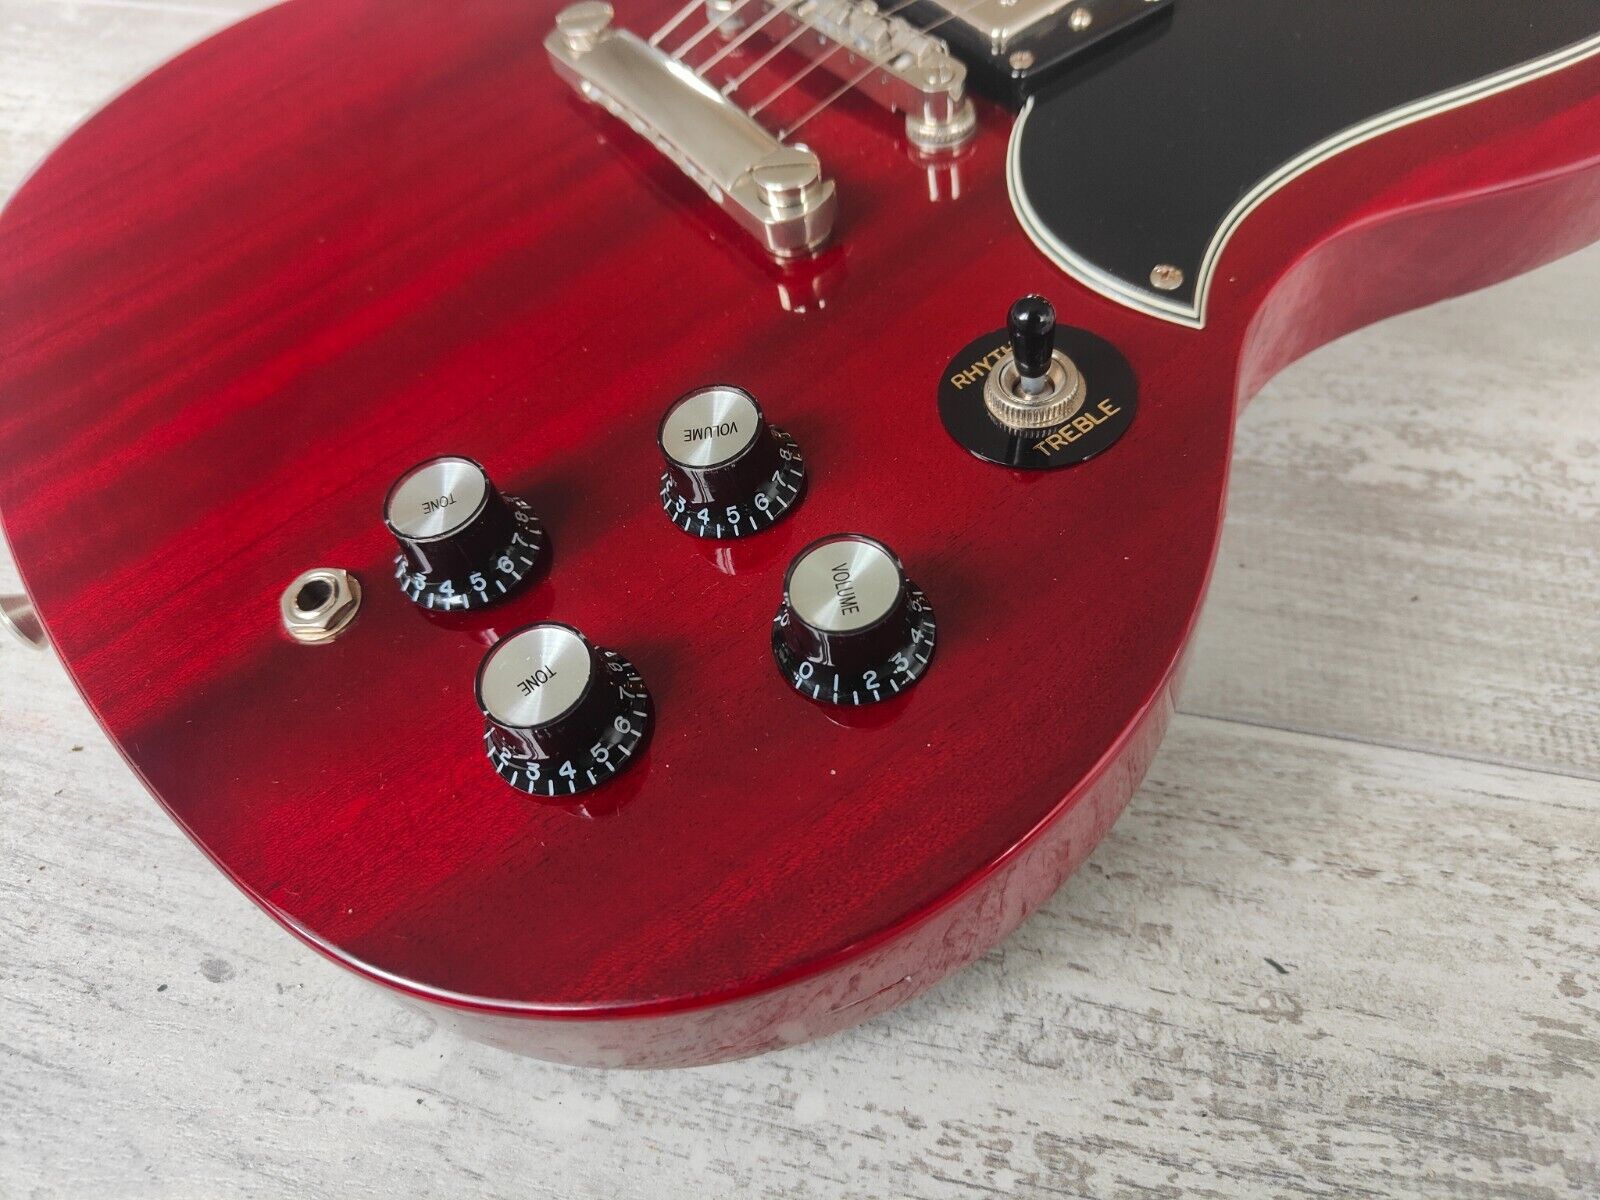 2008 Epiphone G-400 SG Standard (Red)